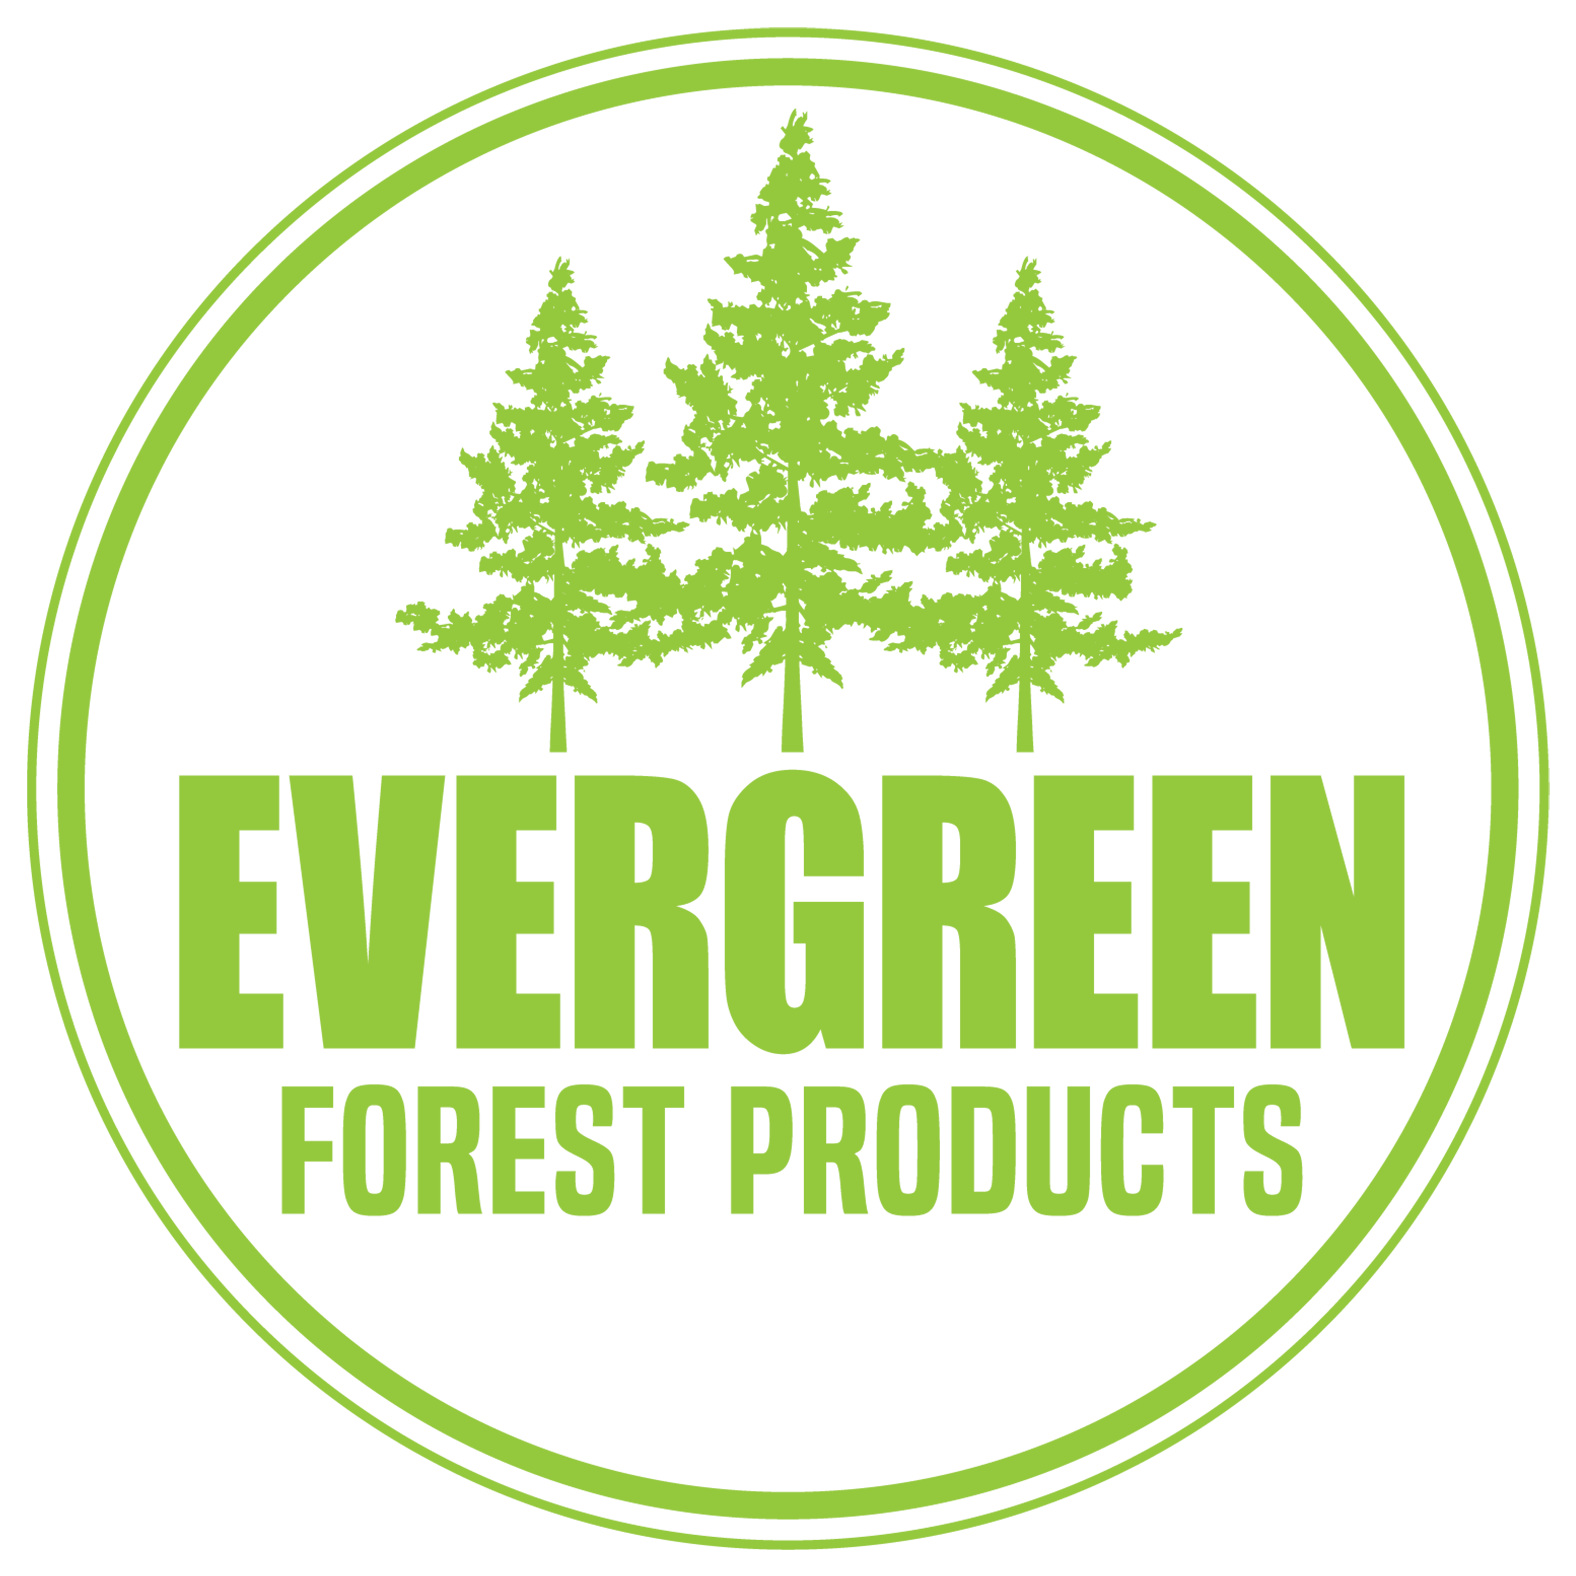 Evergreen Forest Products, Inc. 9183 Mobile Rd, Greenville Alabama 36037